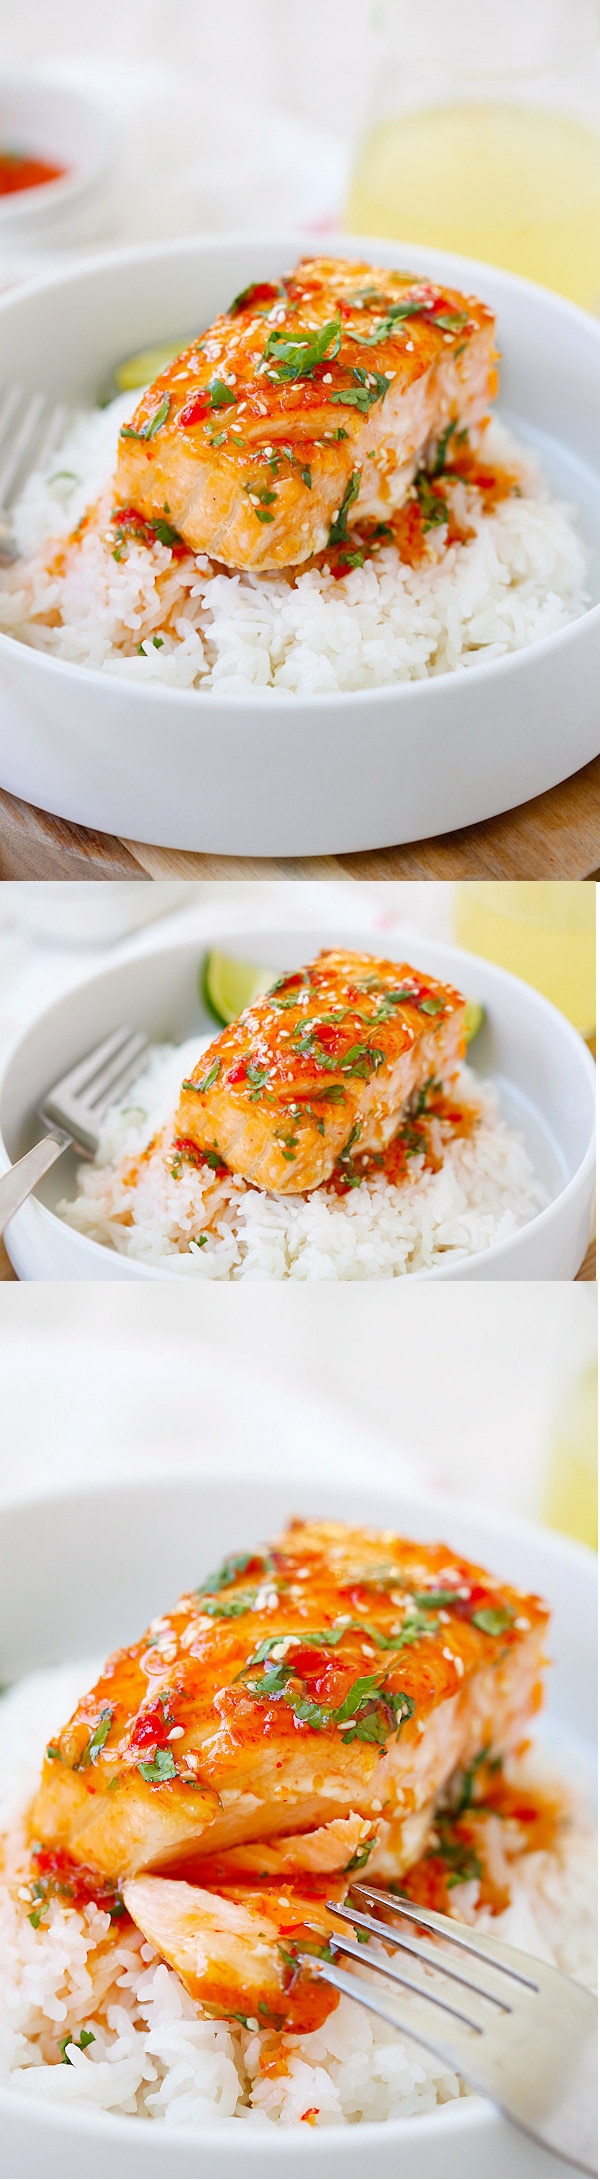 Sweet Chili Salmon - quick and easy salmon with Thai sweet chili sauce. The recipe takes only 15 mins on skillet or you can bake it.